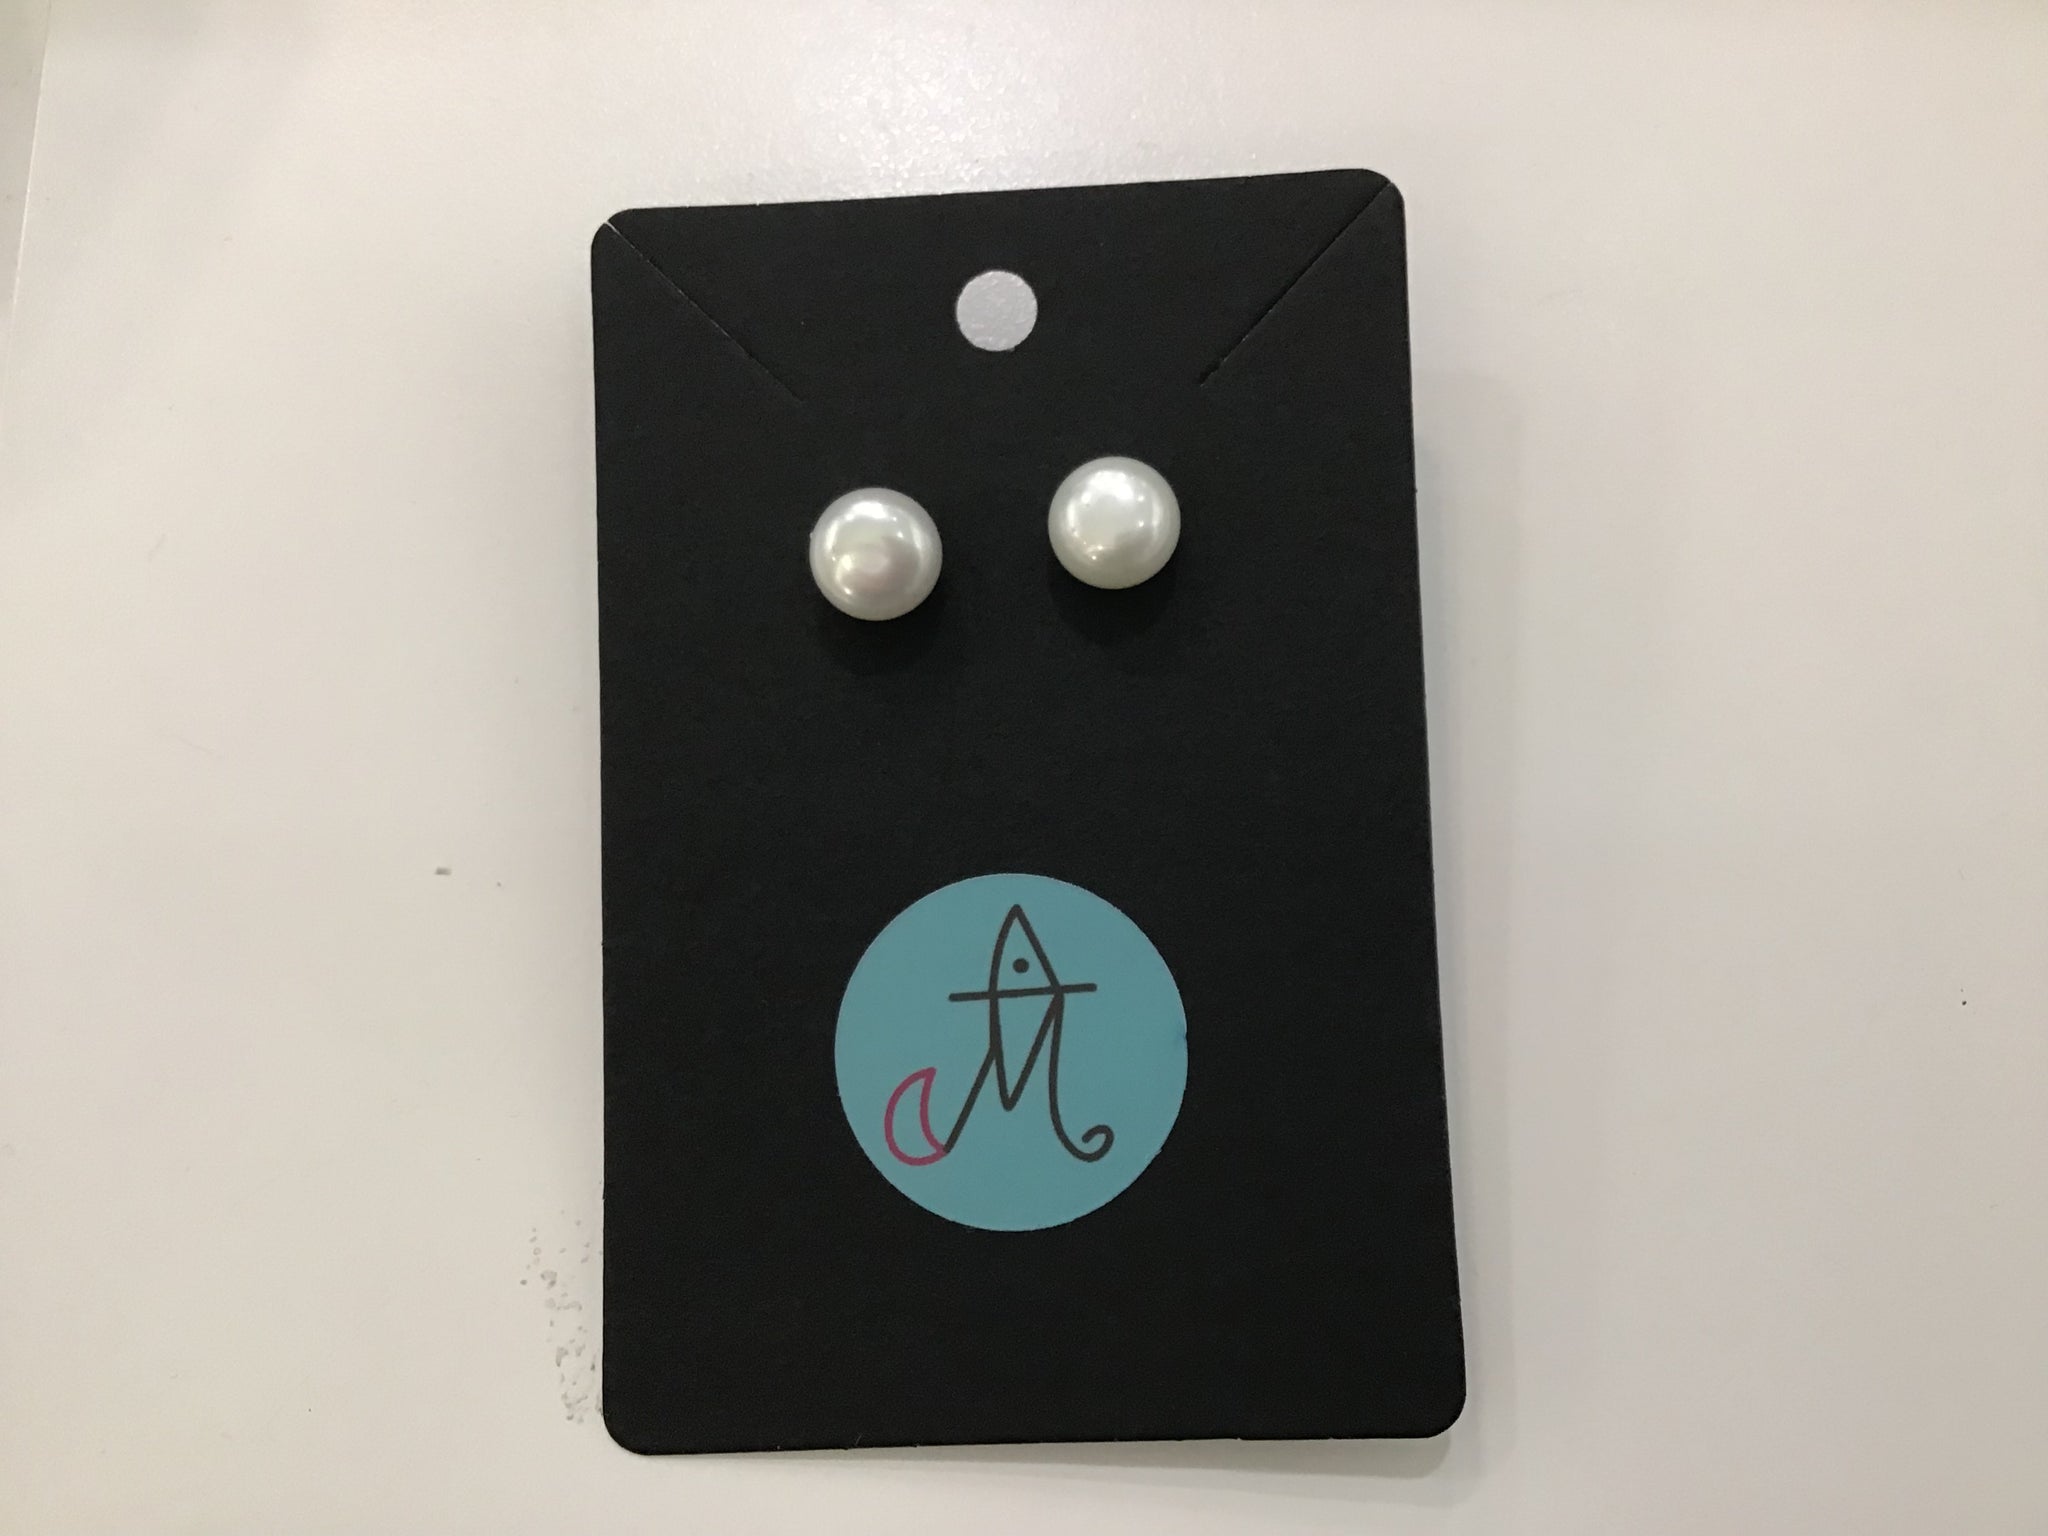 Large Pearl Studs